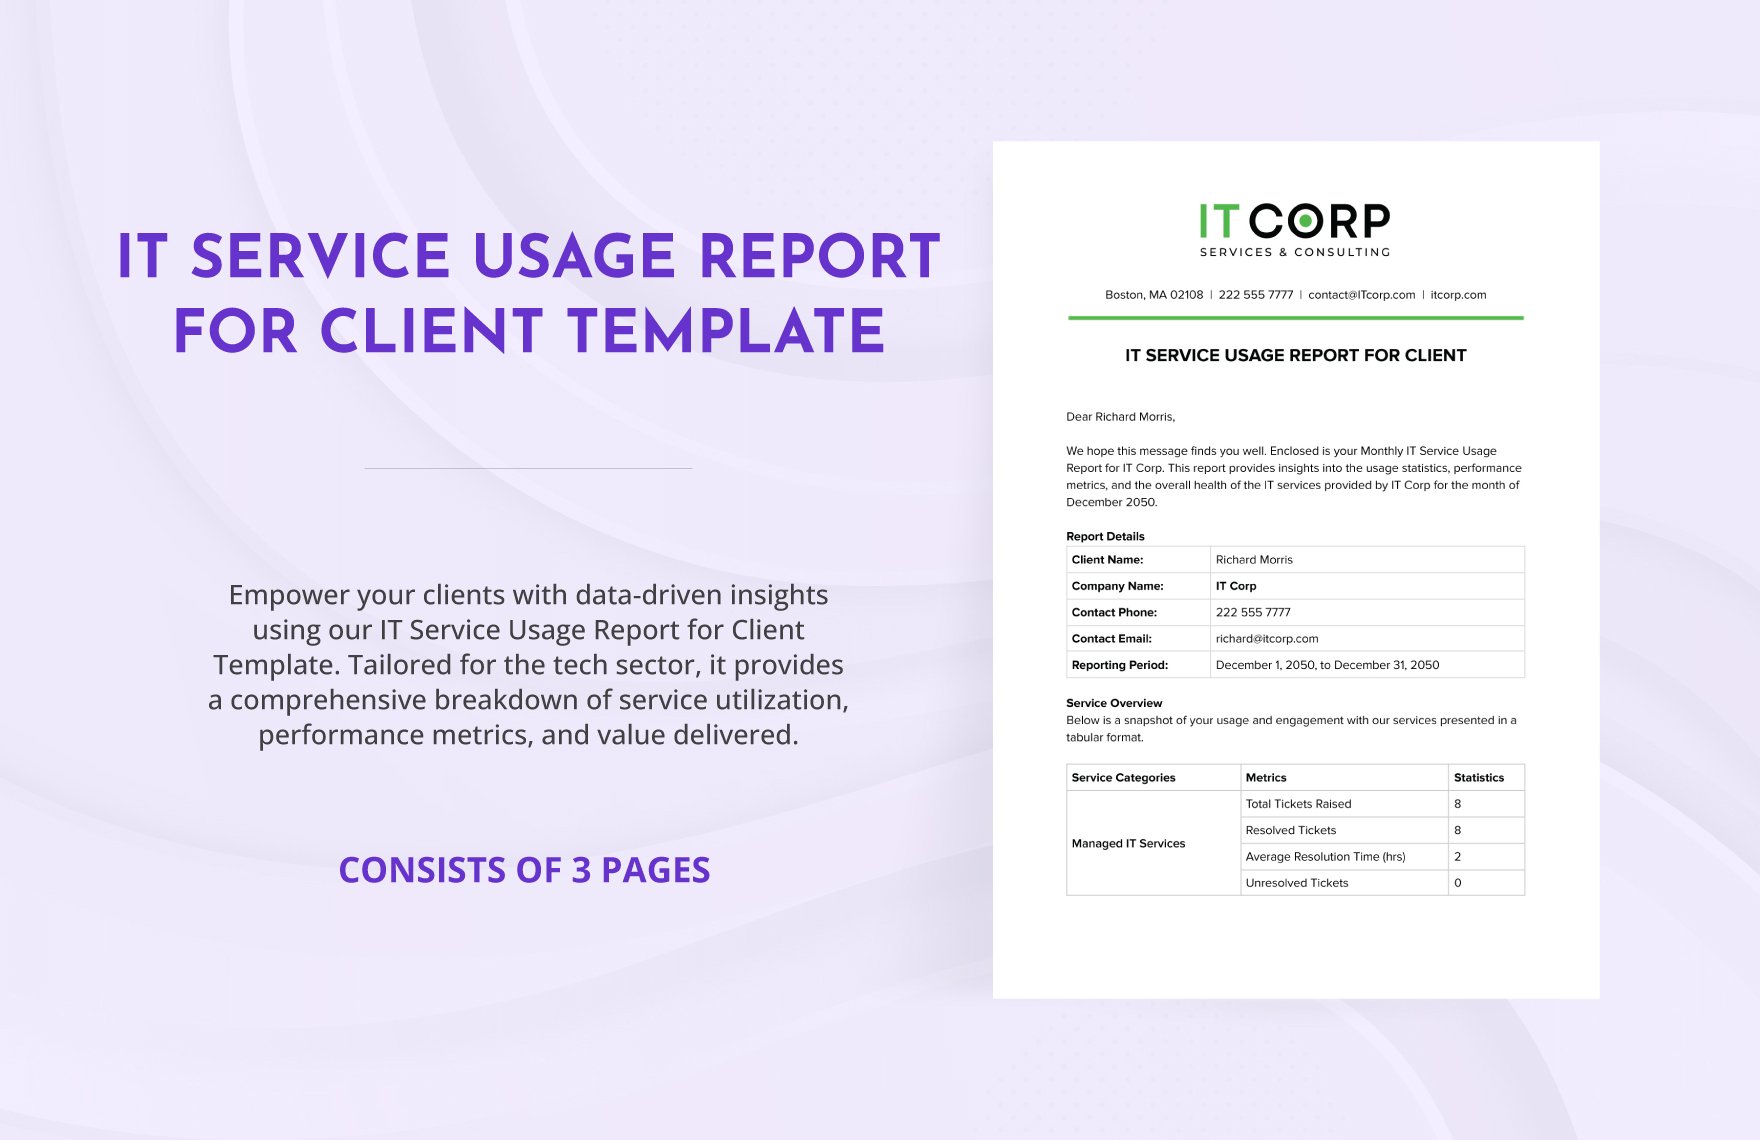 IT Service Usage Report for Client Template